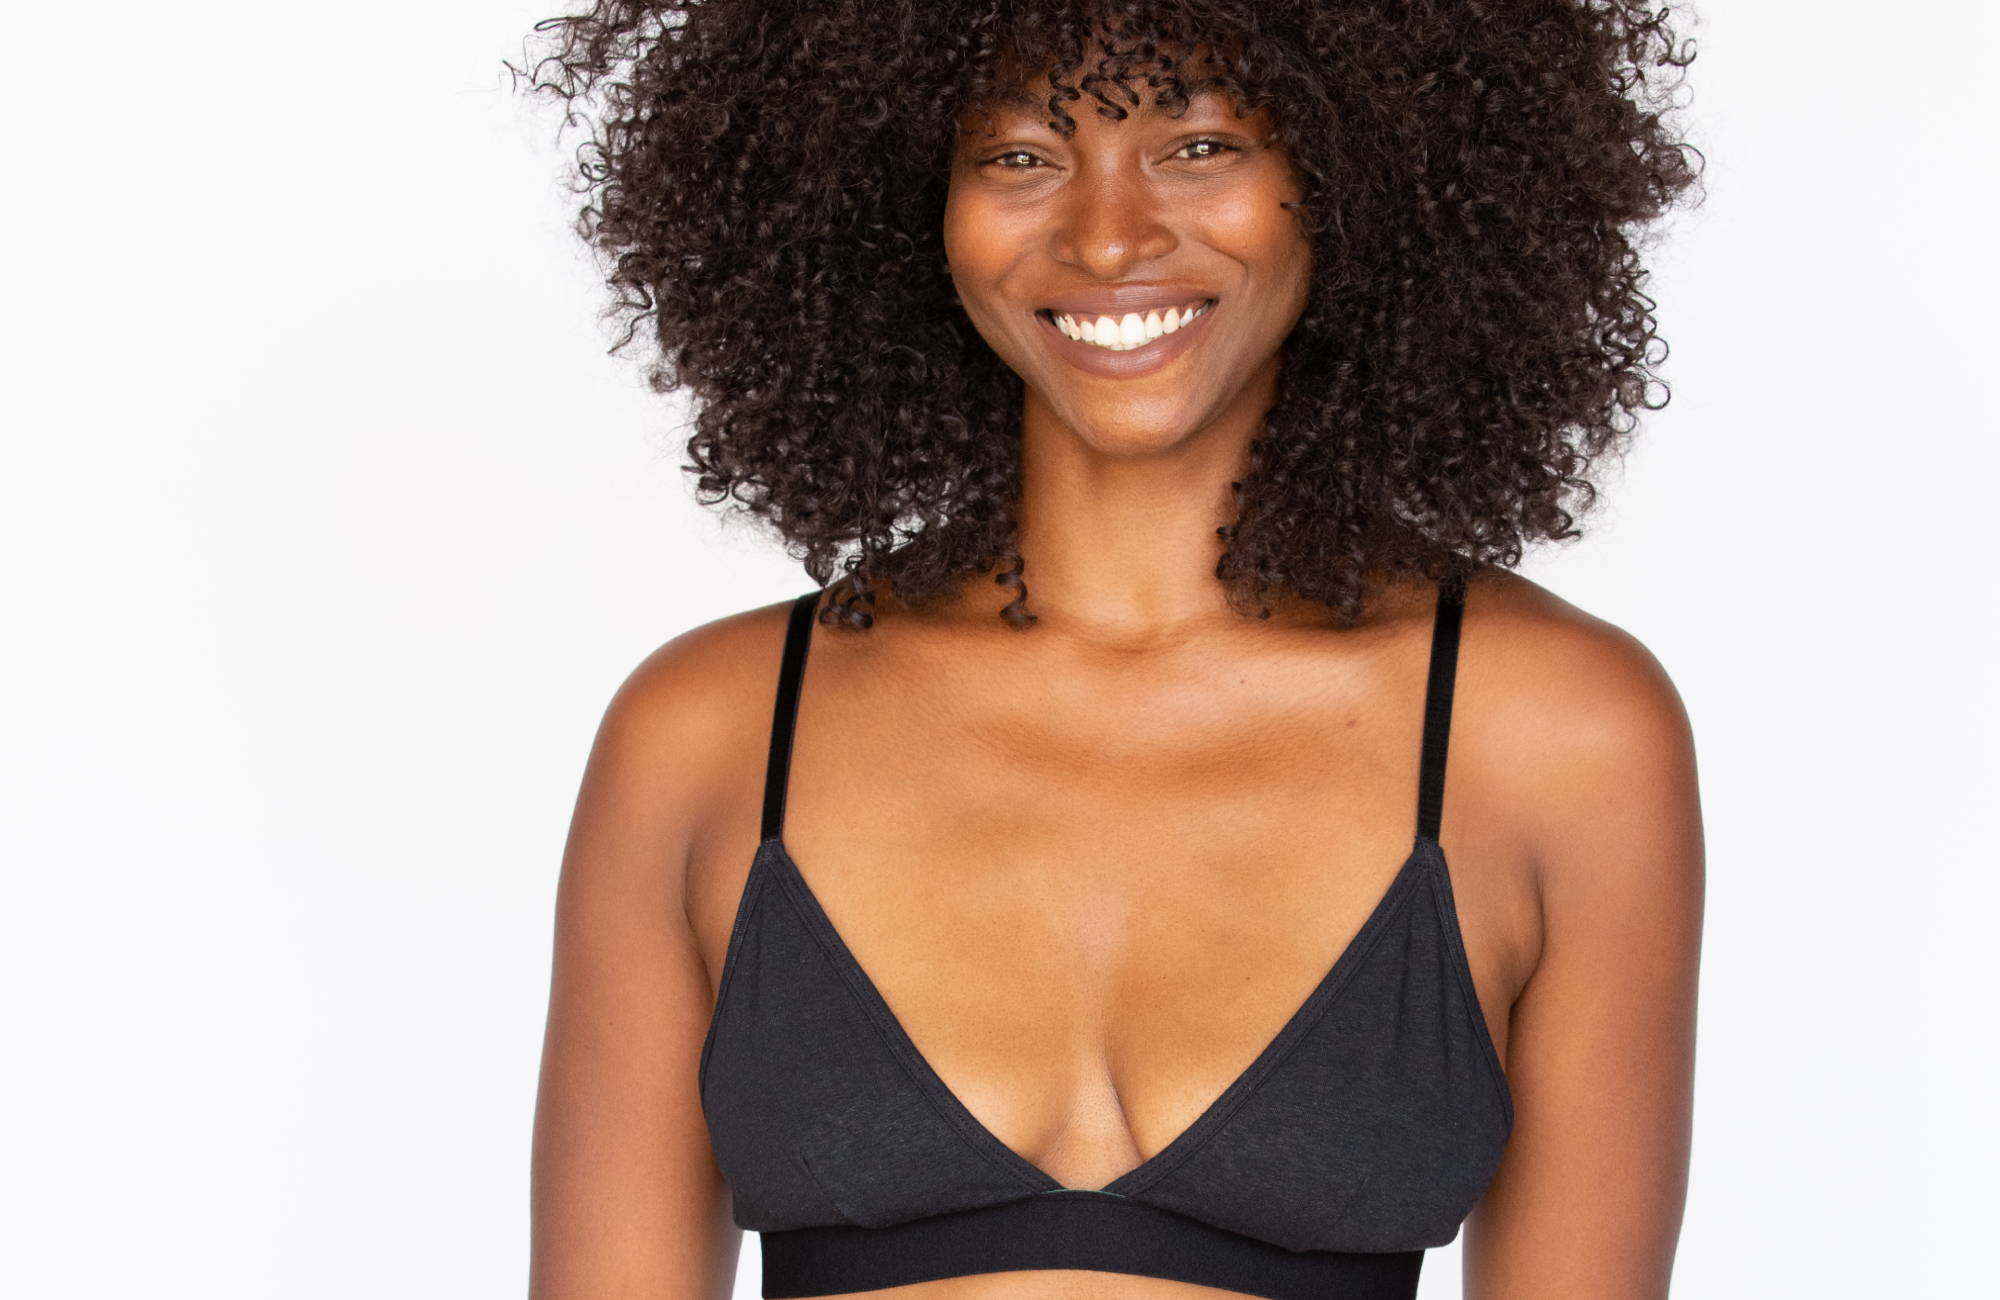 Smiling woman who knows how to tighten bra strap wearing a black triangle bralette with her hands at her side